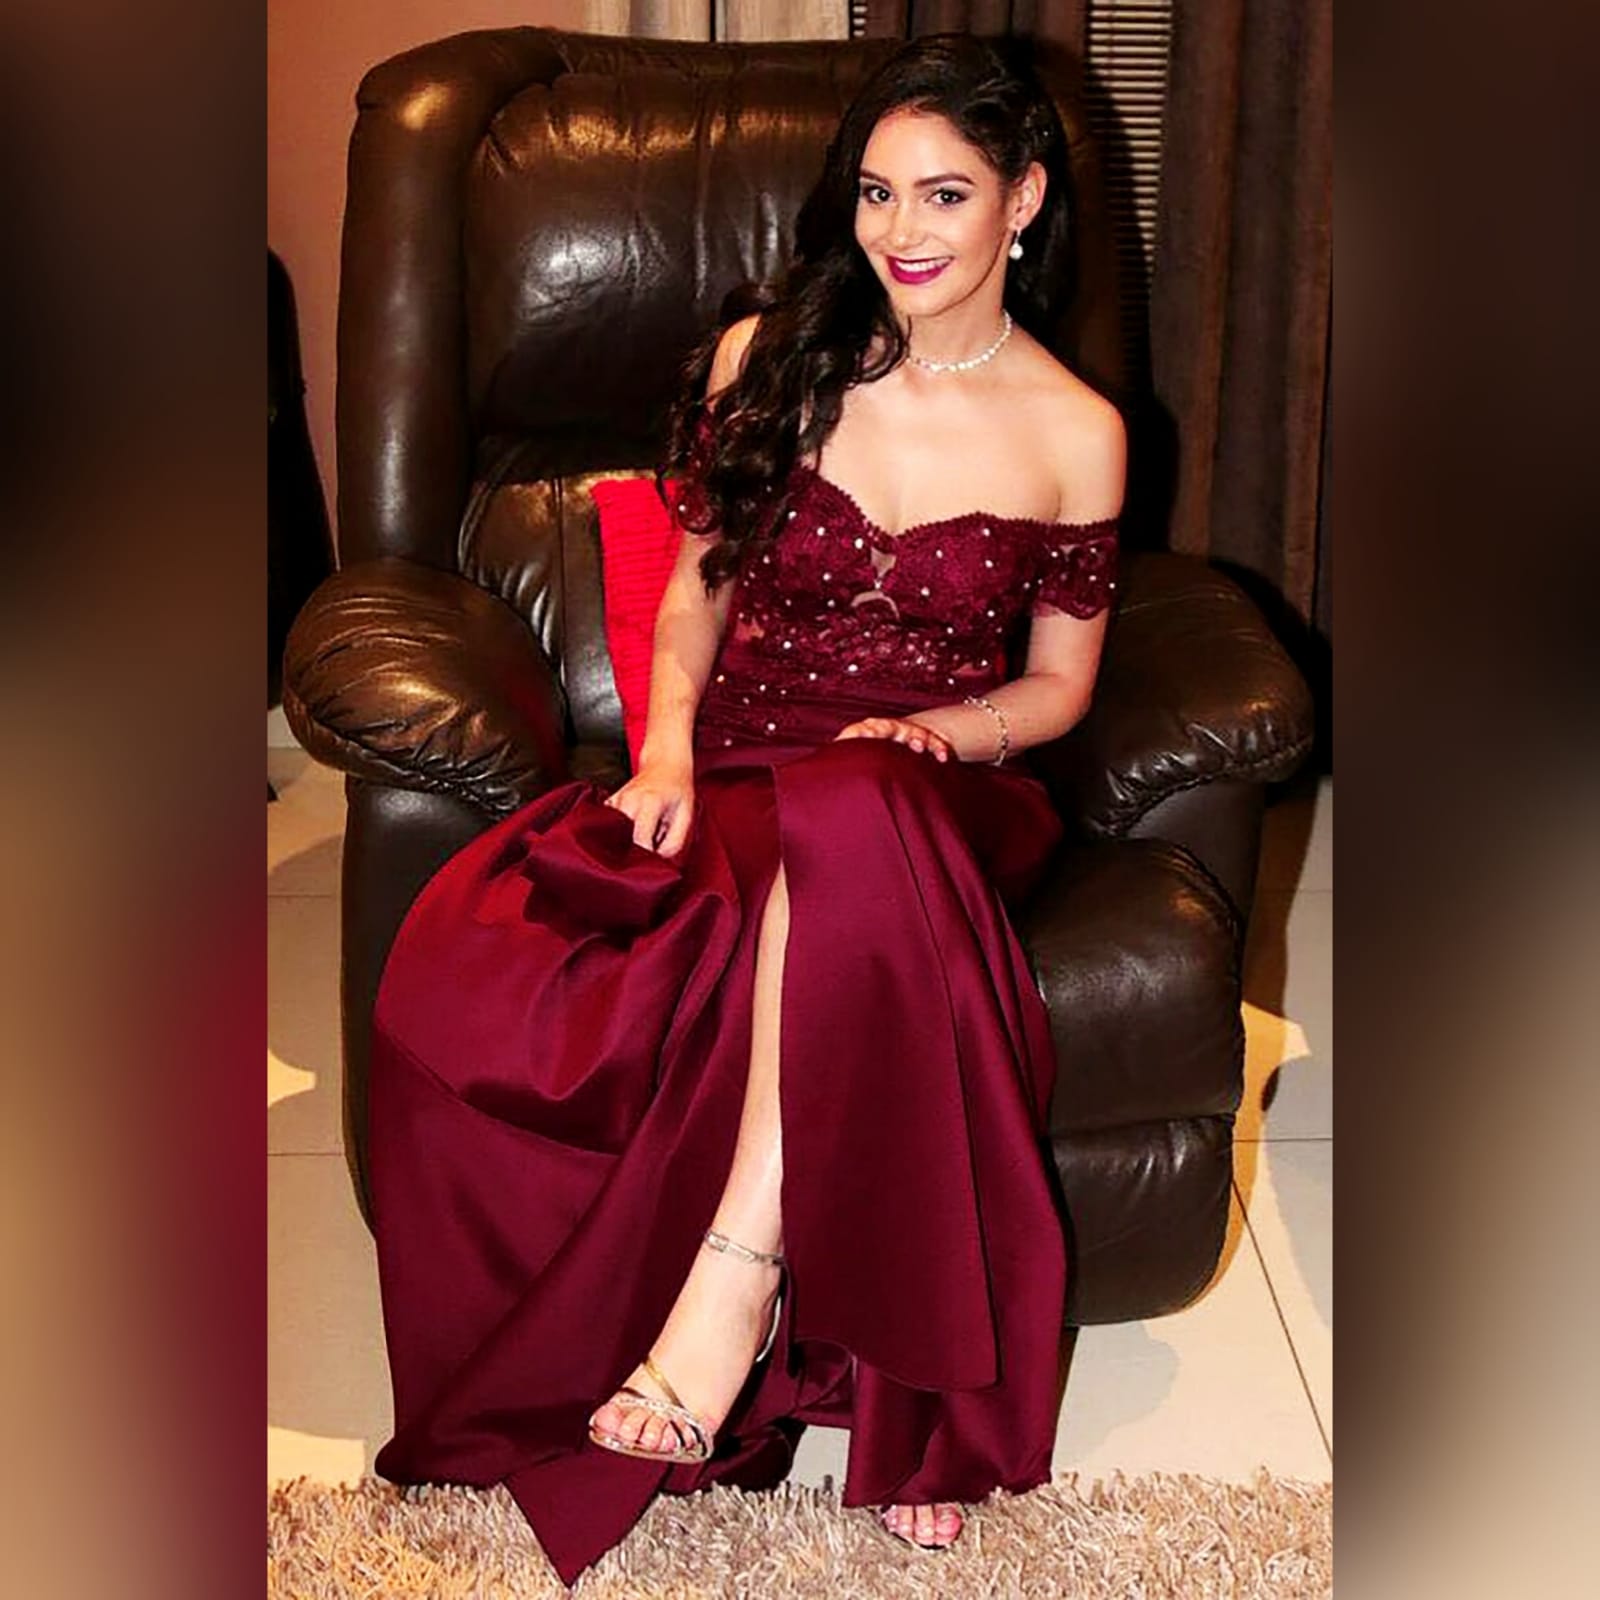 Burgundy off shoulder long matric dance dress 6 burgundy off shoulder long matric dance dress. With an illusion bodice detailed with lace and beads and off-shoulder short sleeves. Bottom fitted till hip, with a high slit and a train for a touch of sexy and drama.